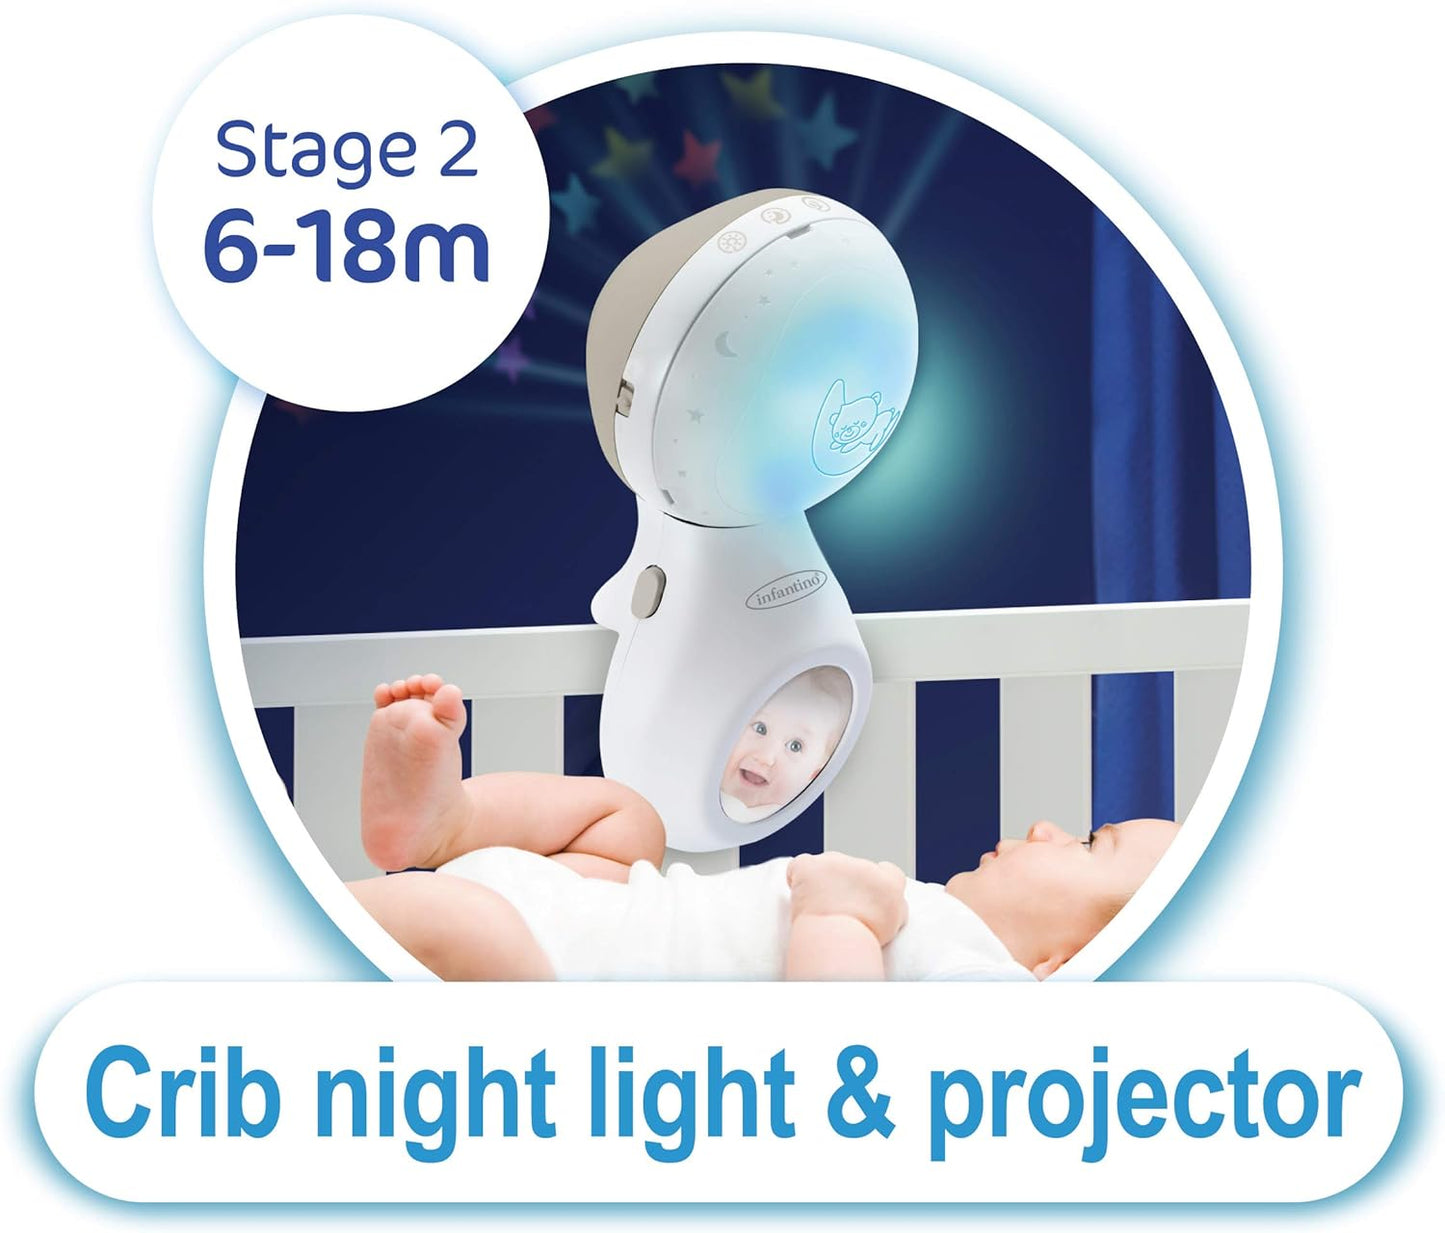 Infantino - 3 in 1 Baby Musical Projector